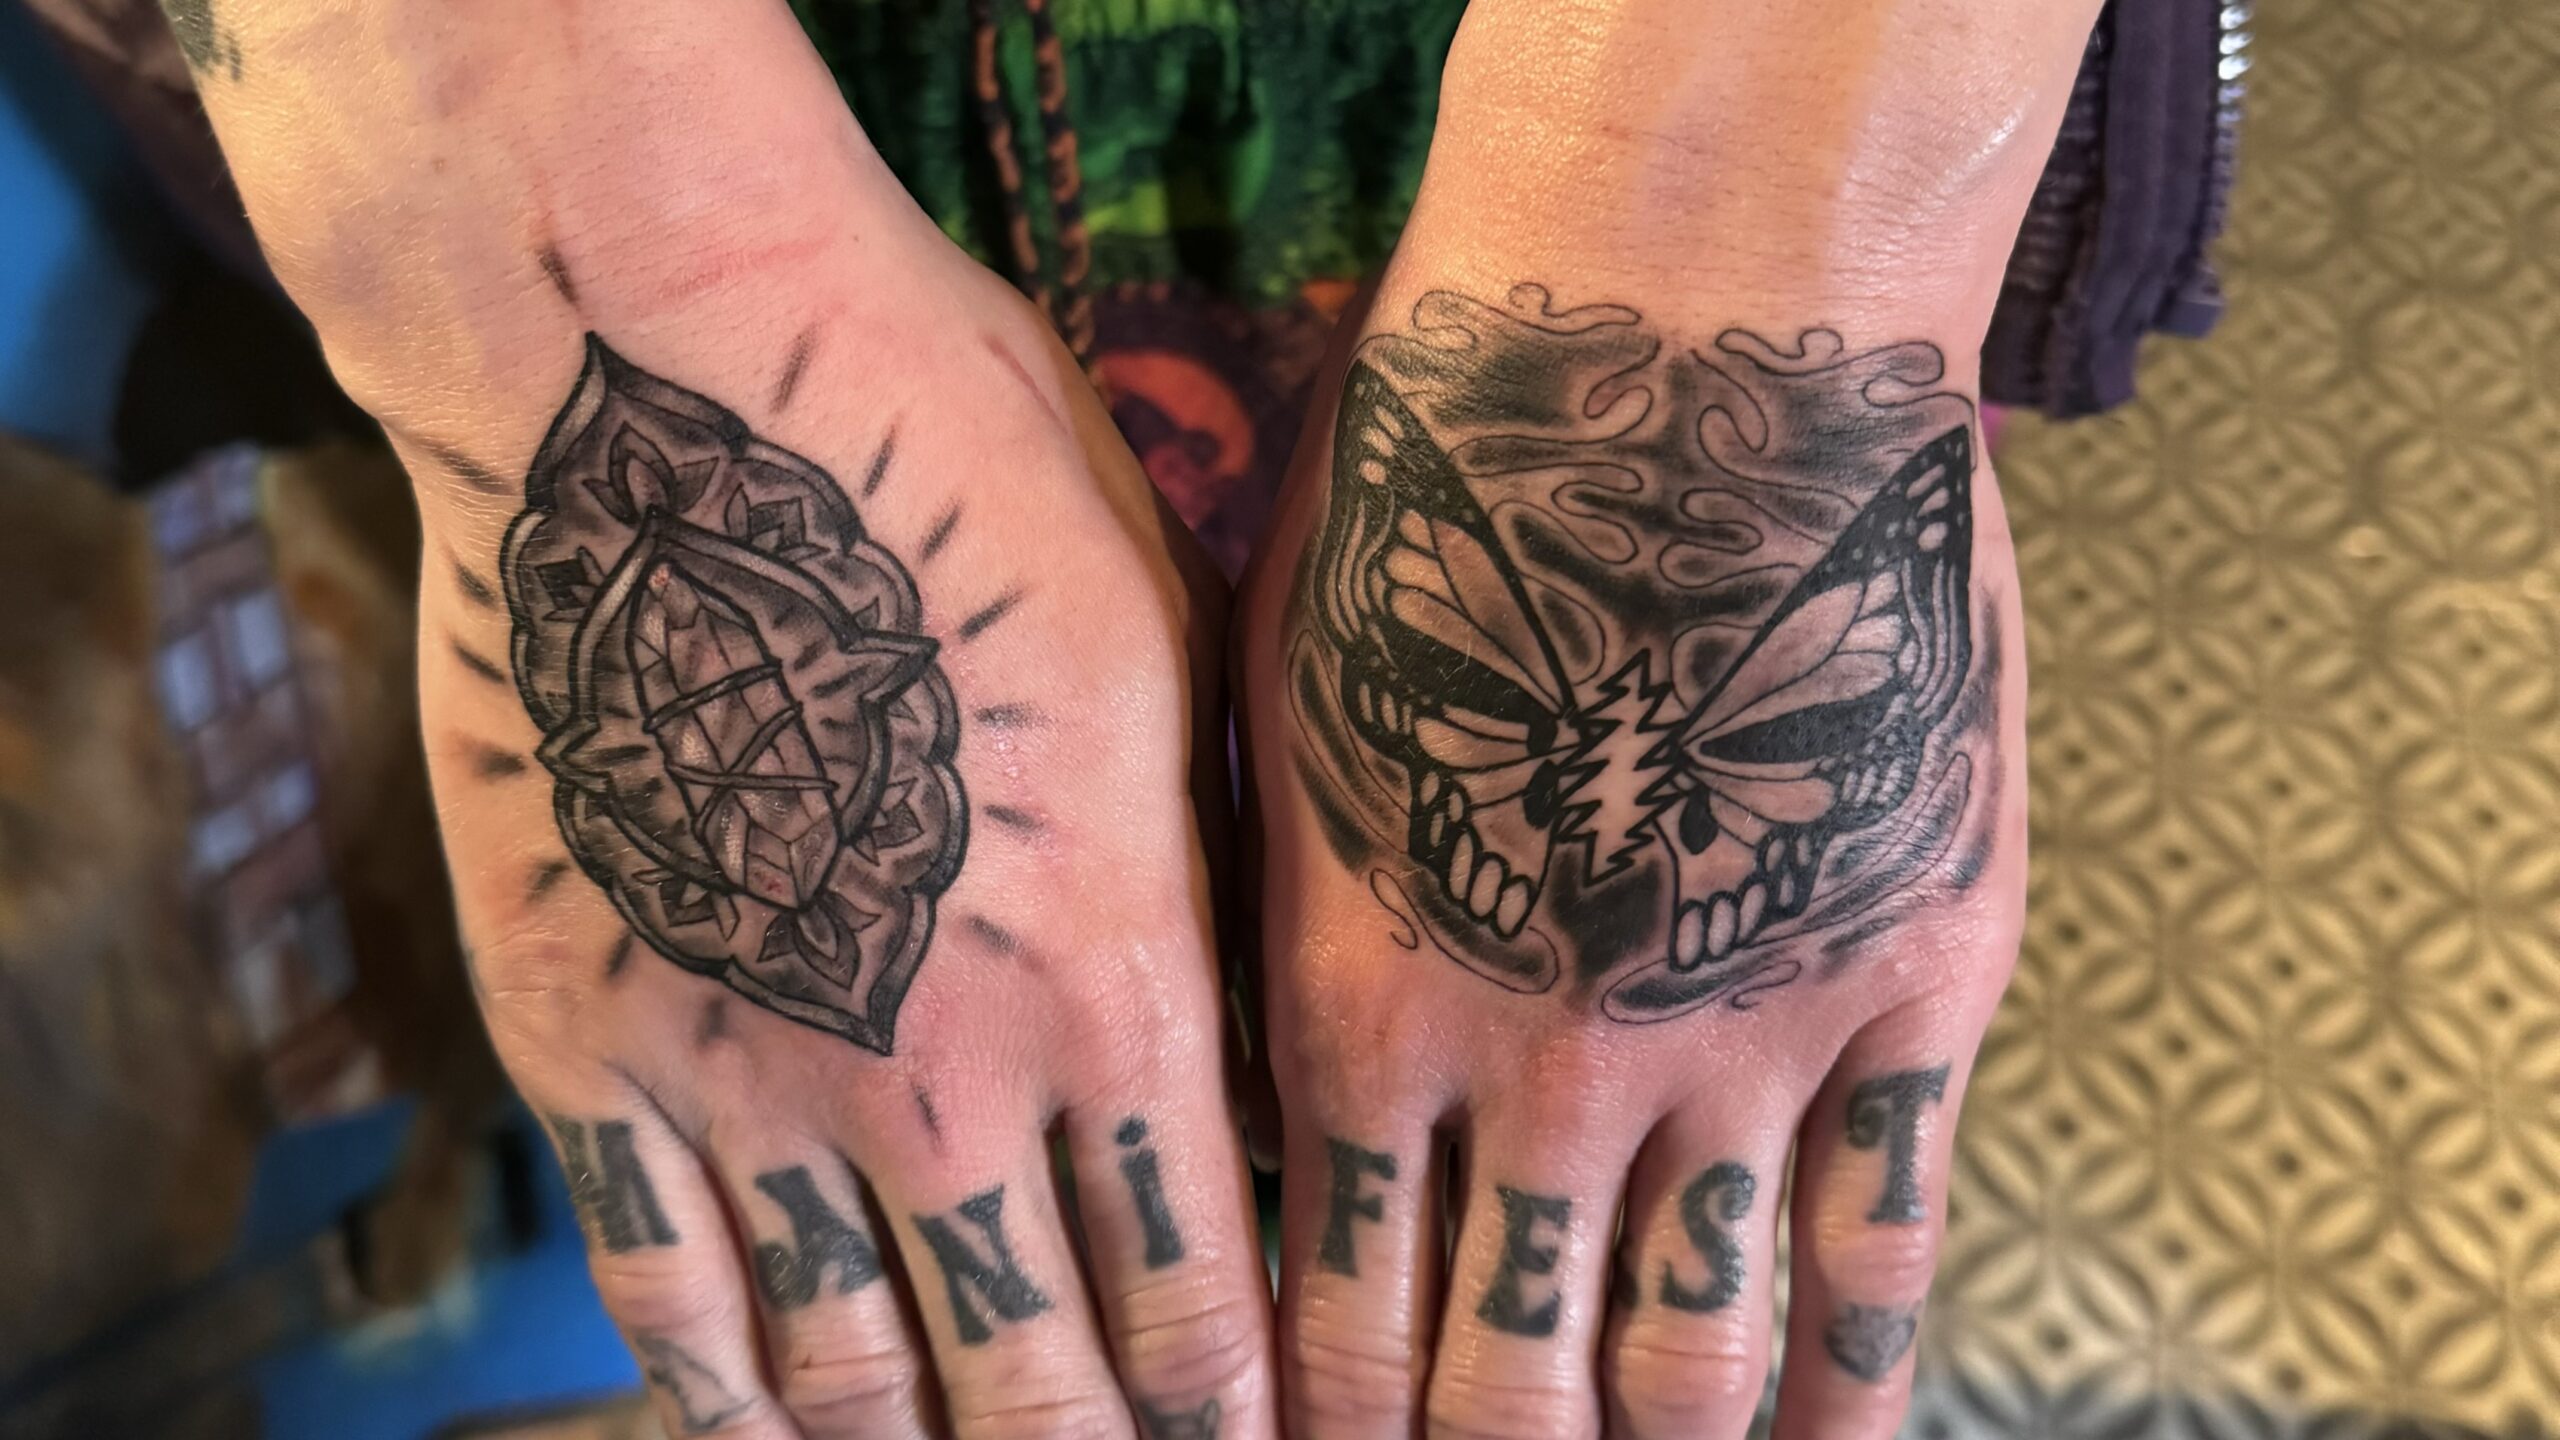 Tattoos on the palm hurts worse than any other spot, including the dick or  balls. Palm tattoos don't hold up. White tattoos never hold up. Artist puts  poor girl through a lot